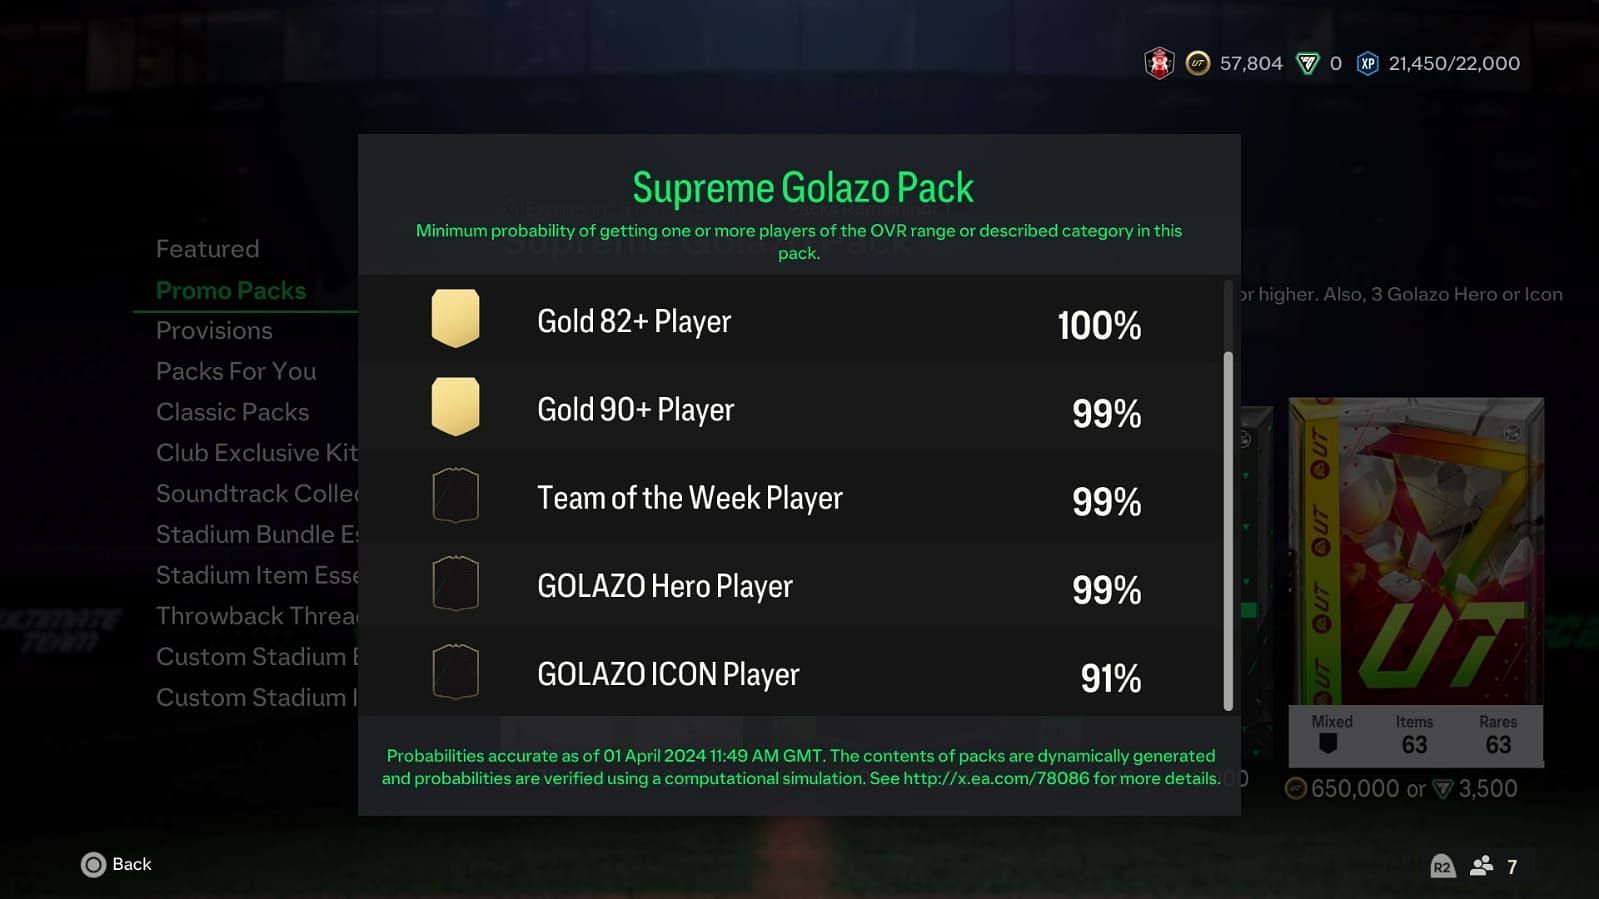 Store packs offer some amazing odds in Ultimate Team (Image via EA Sports)